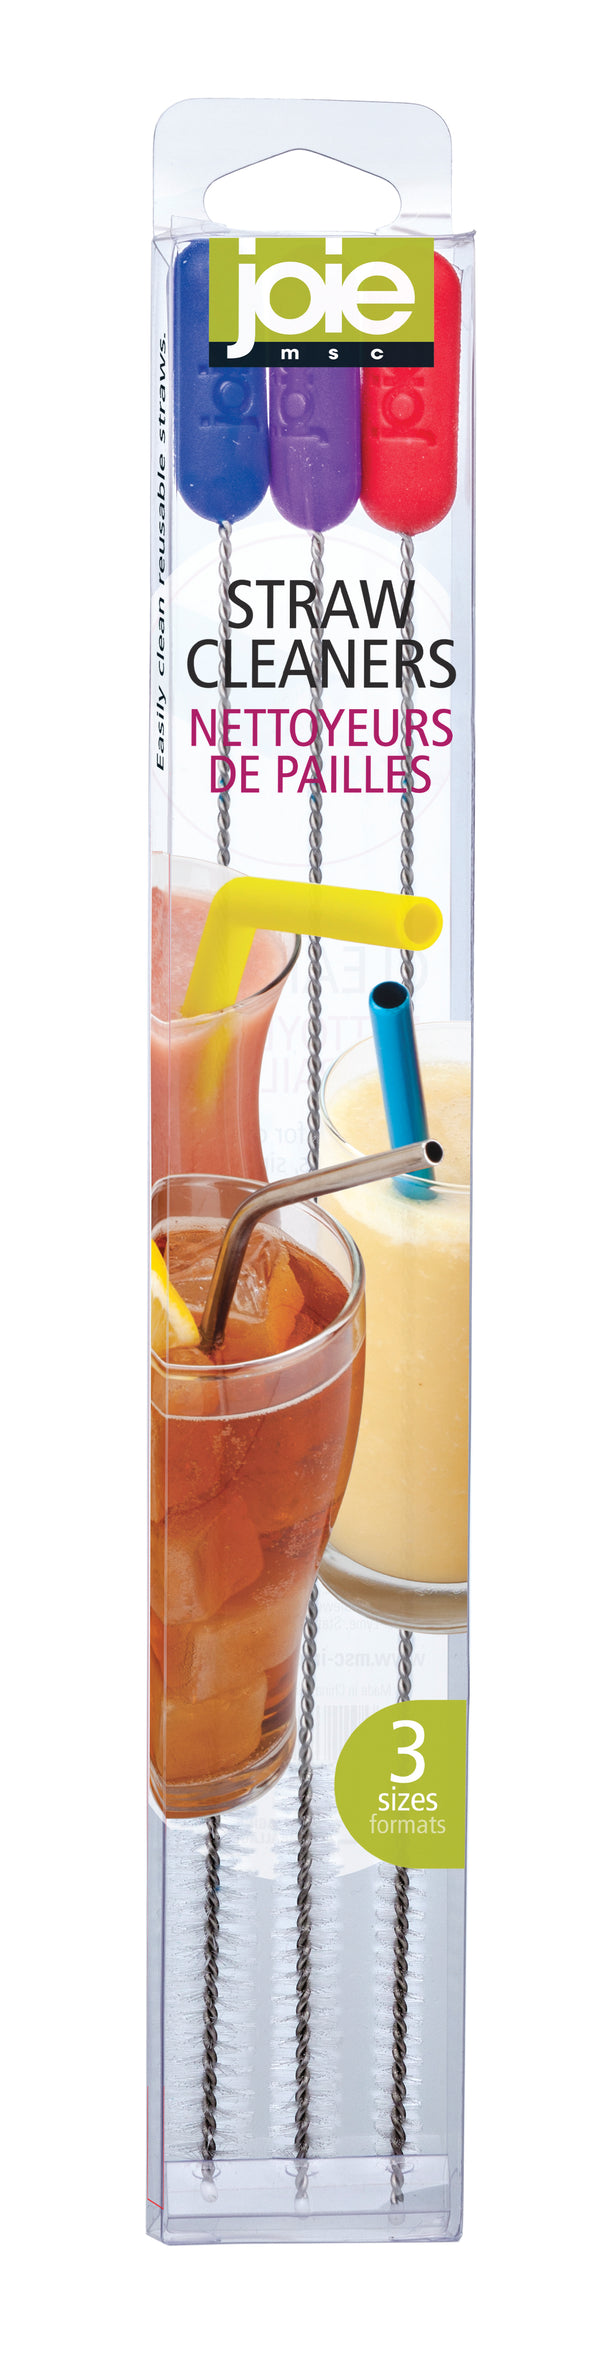 Straw Cleaners - Set of 3